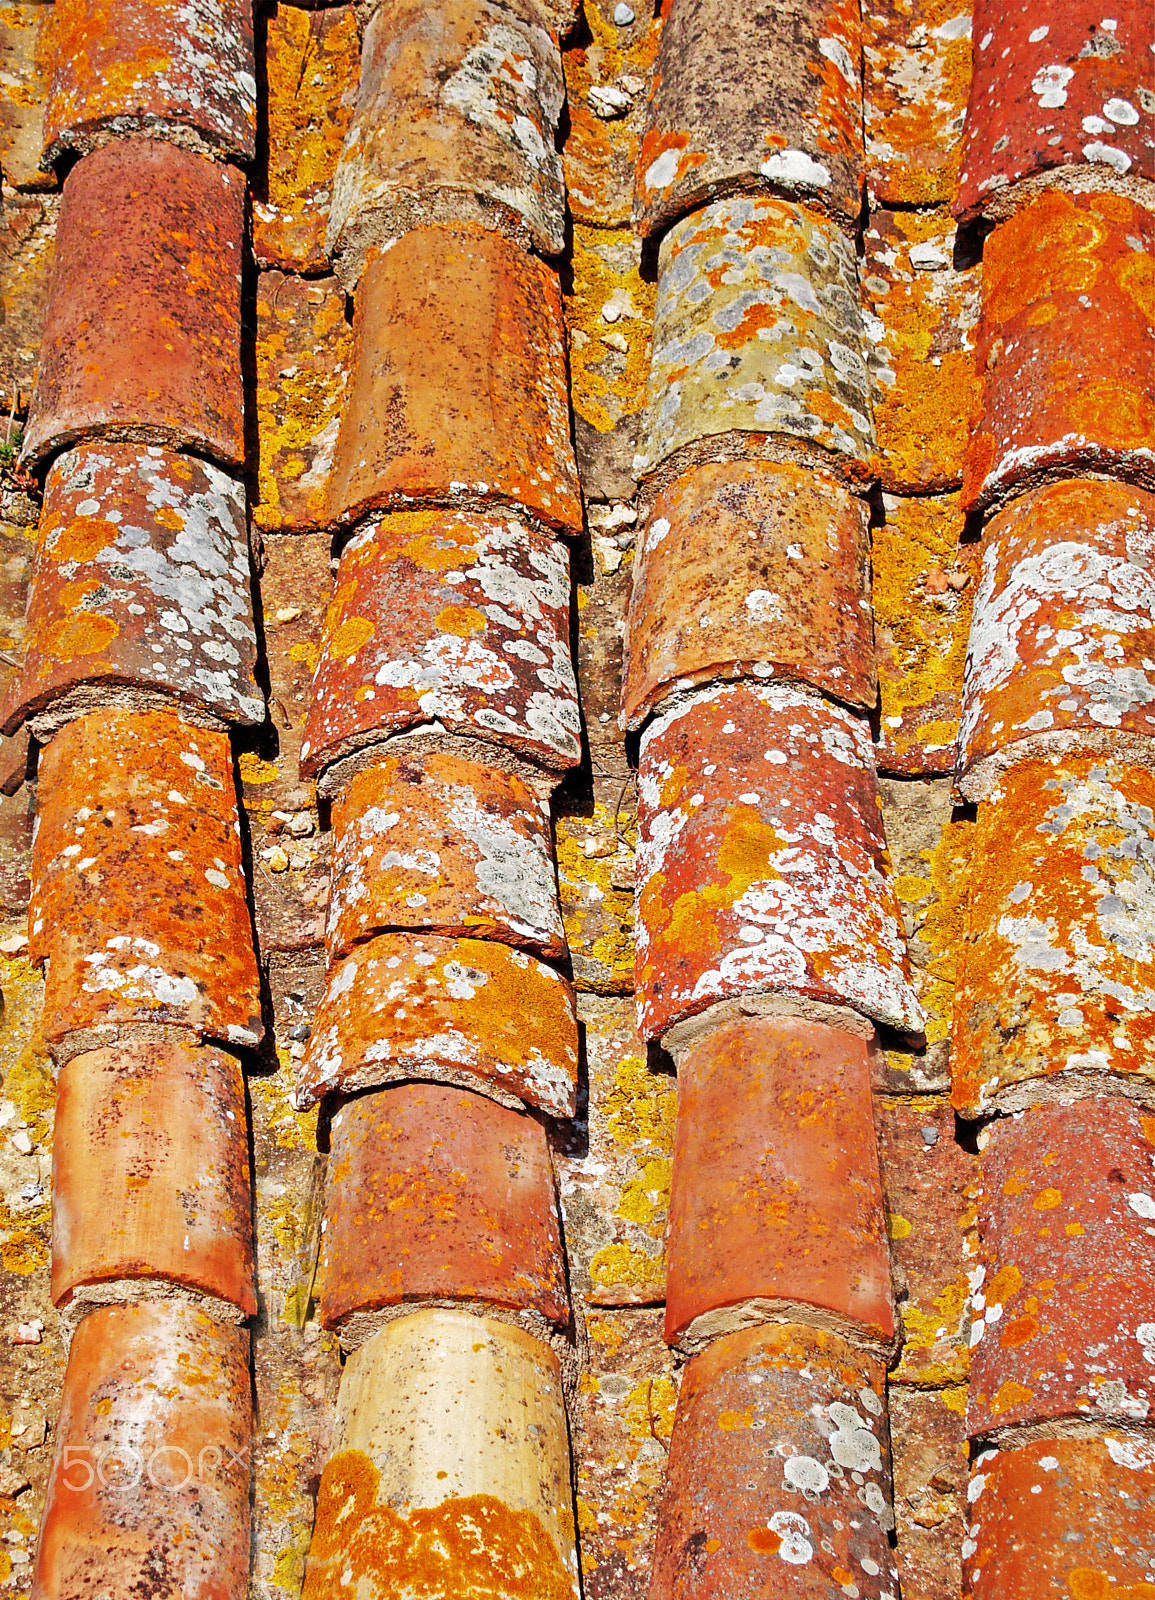 Sony Cyber-shot DSC-W110 sample photo. Fragment of colorful old tile roof photography